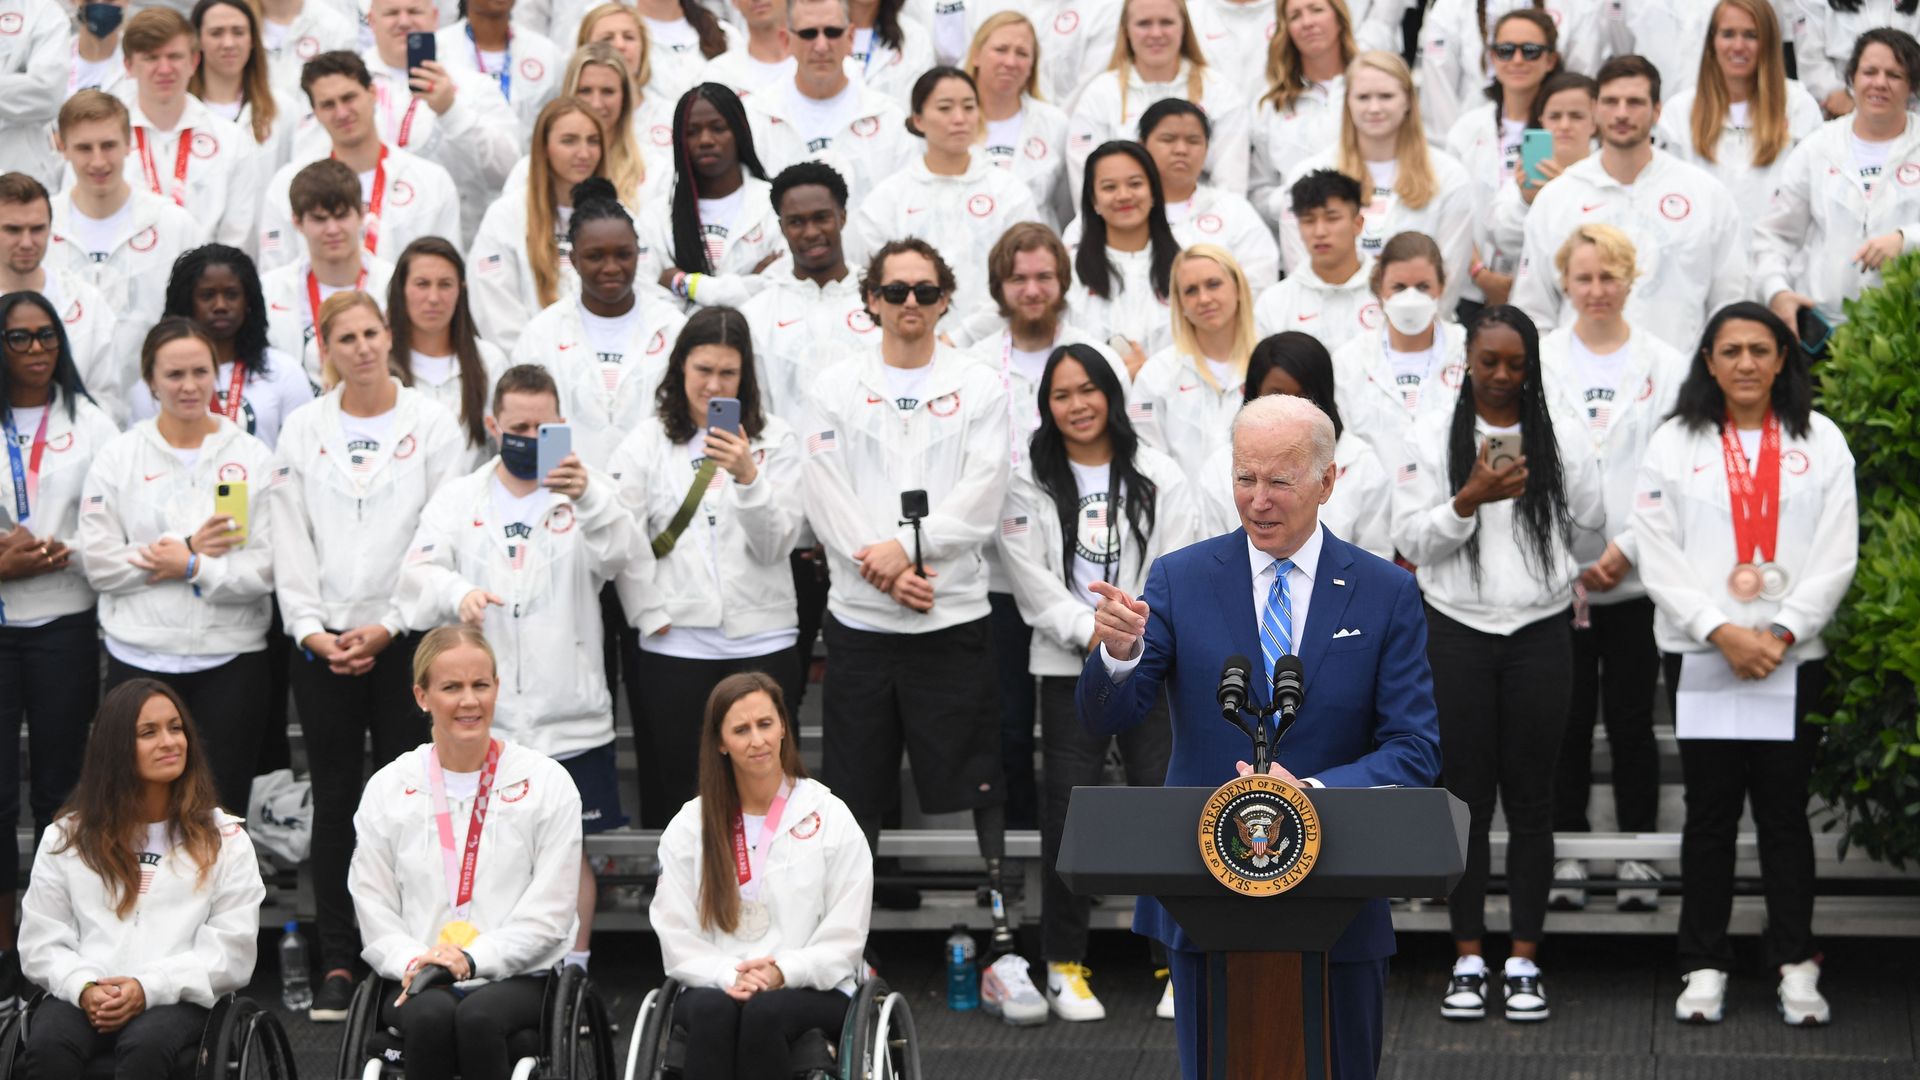 Photo of Joe Biden speaking from a podium with rows of people wearing white standing behind him and seated at wheelchairs beside him